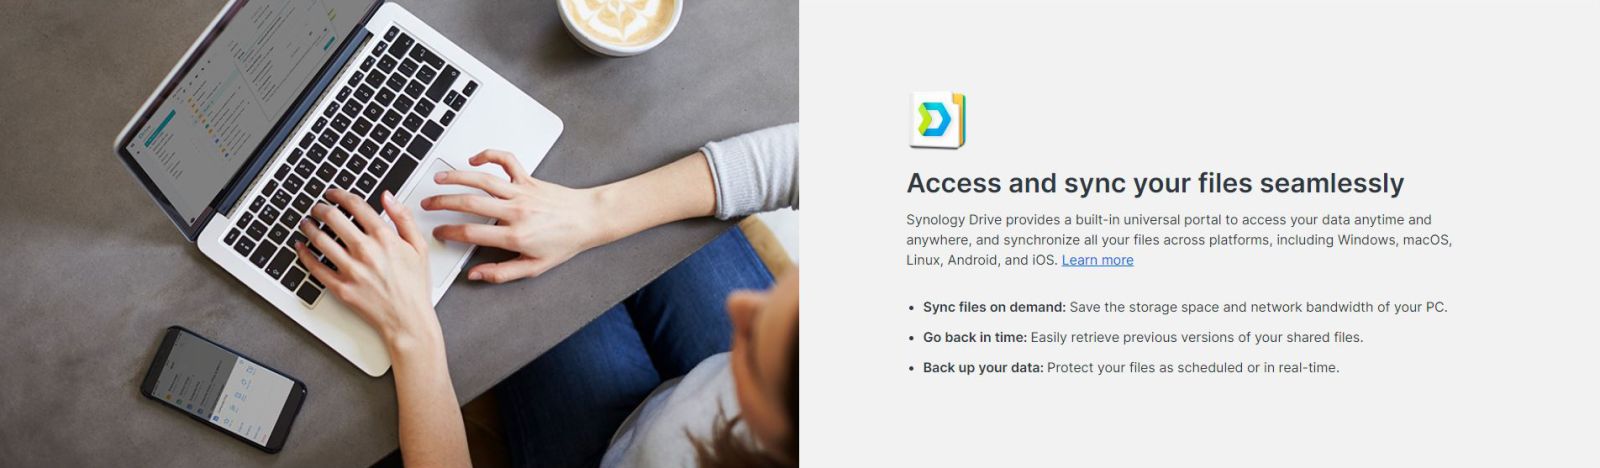 access and sync your files seamlessly